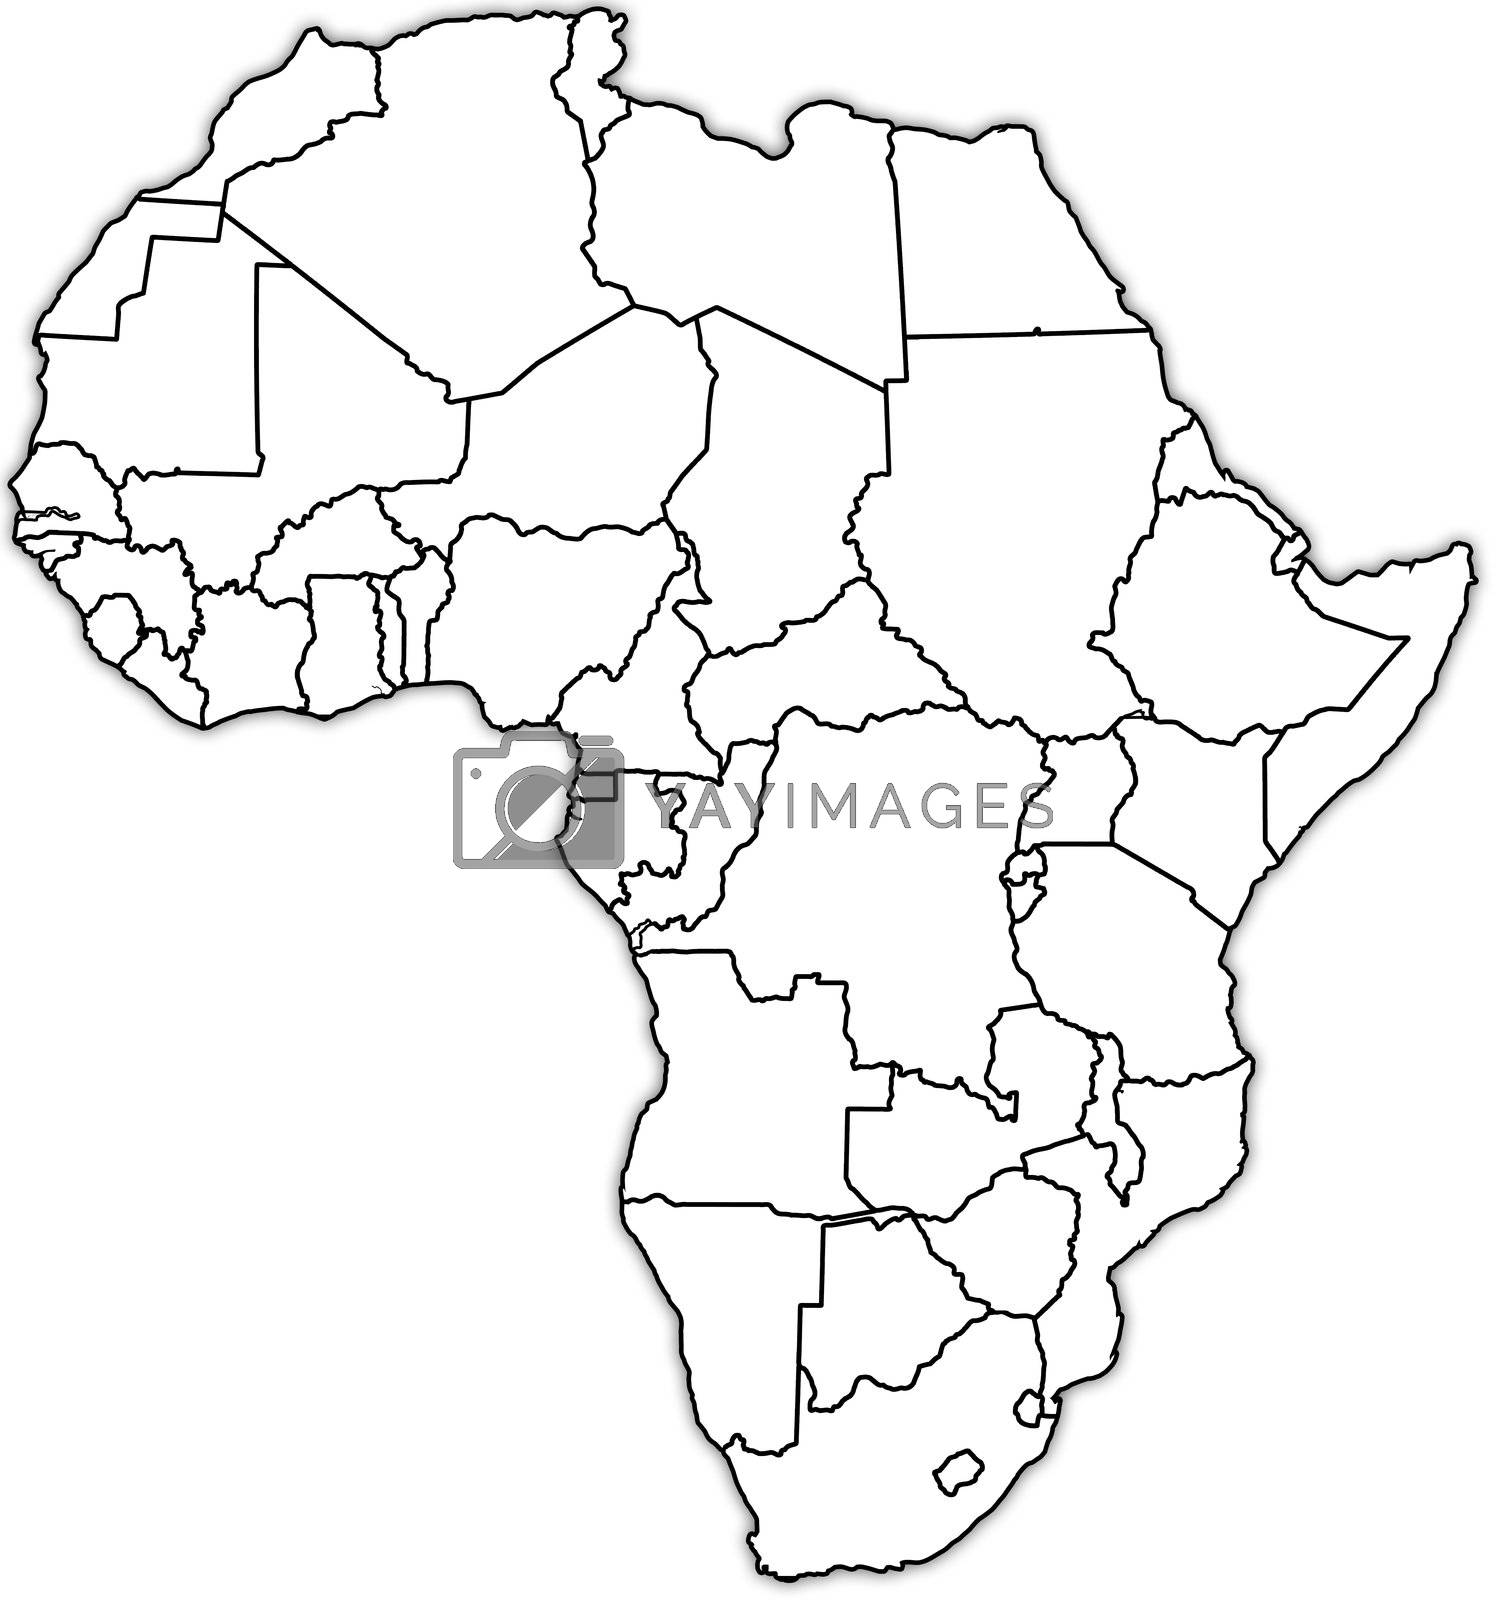 Royalty free image of africa political map by michal812